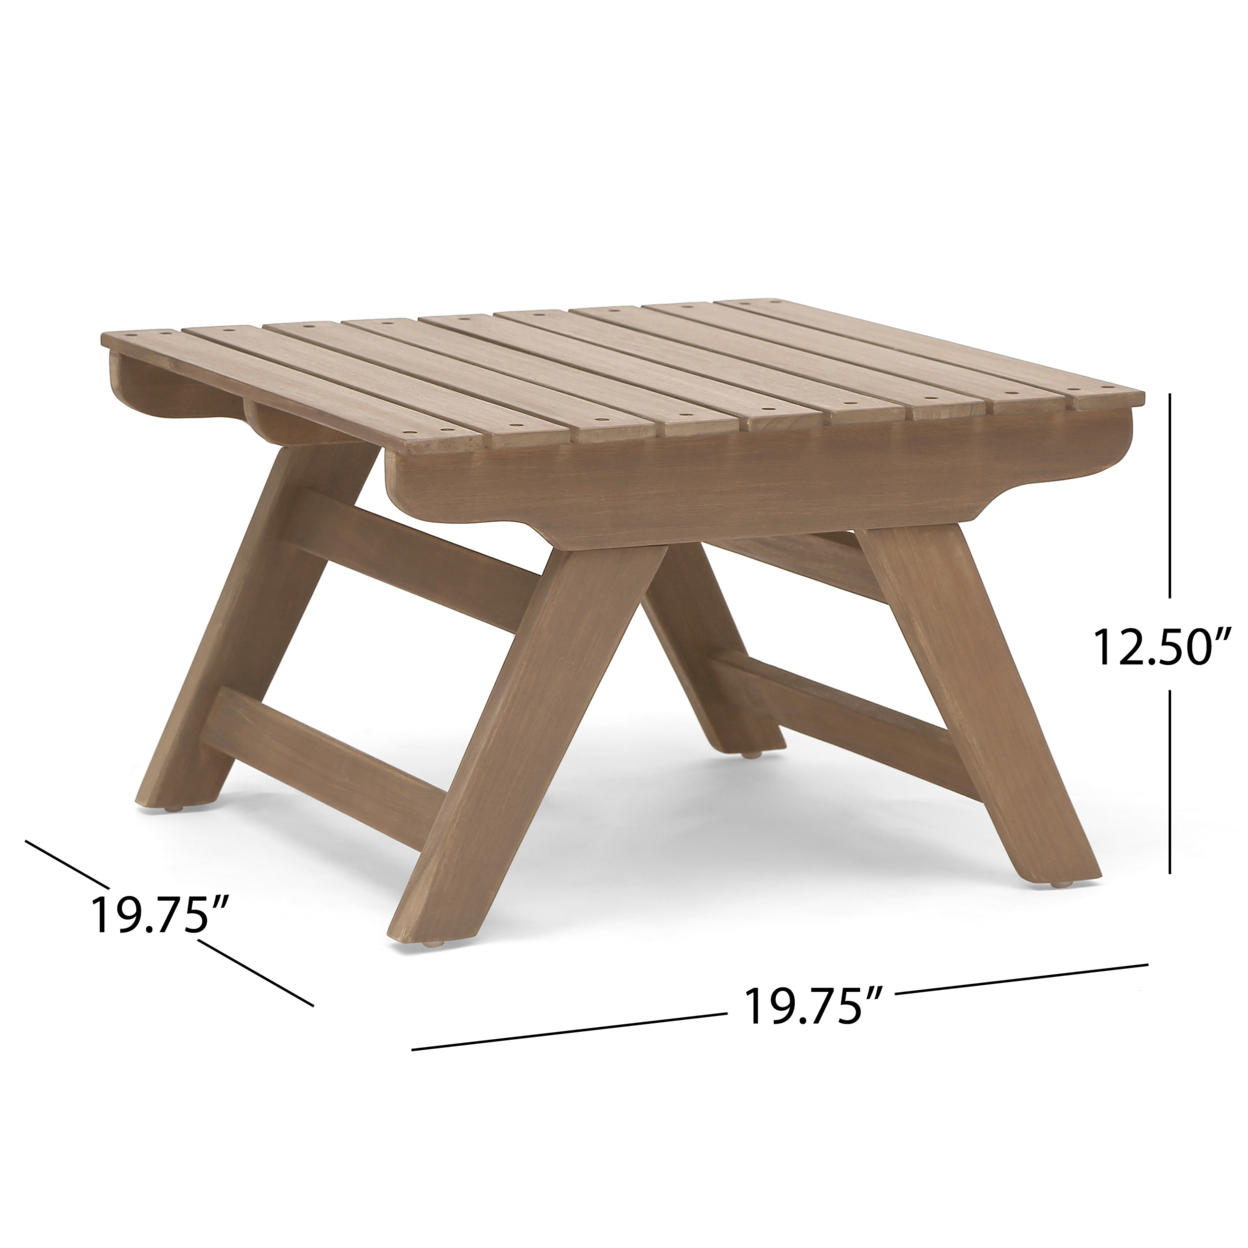 Magnolia Outdoor Acacia Wood 2 Seater Chat Set With Side Table